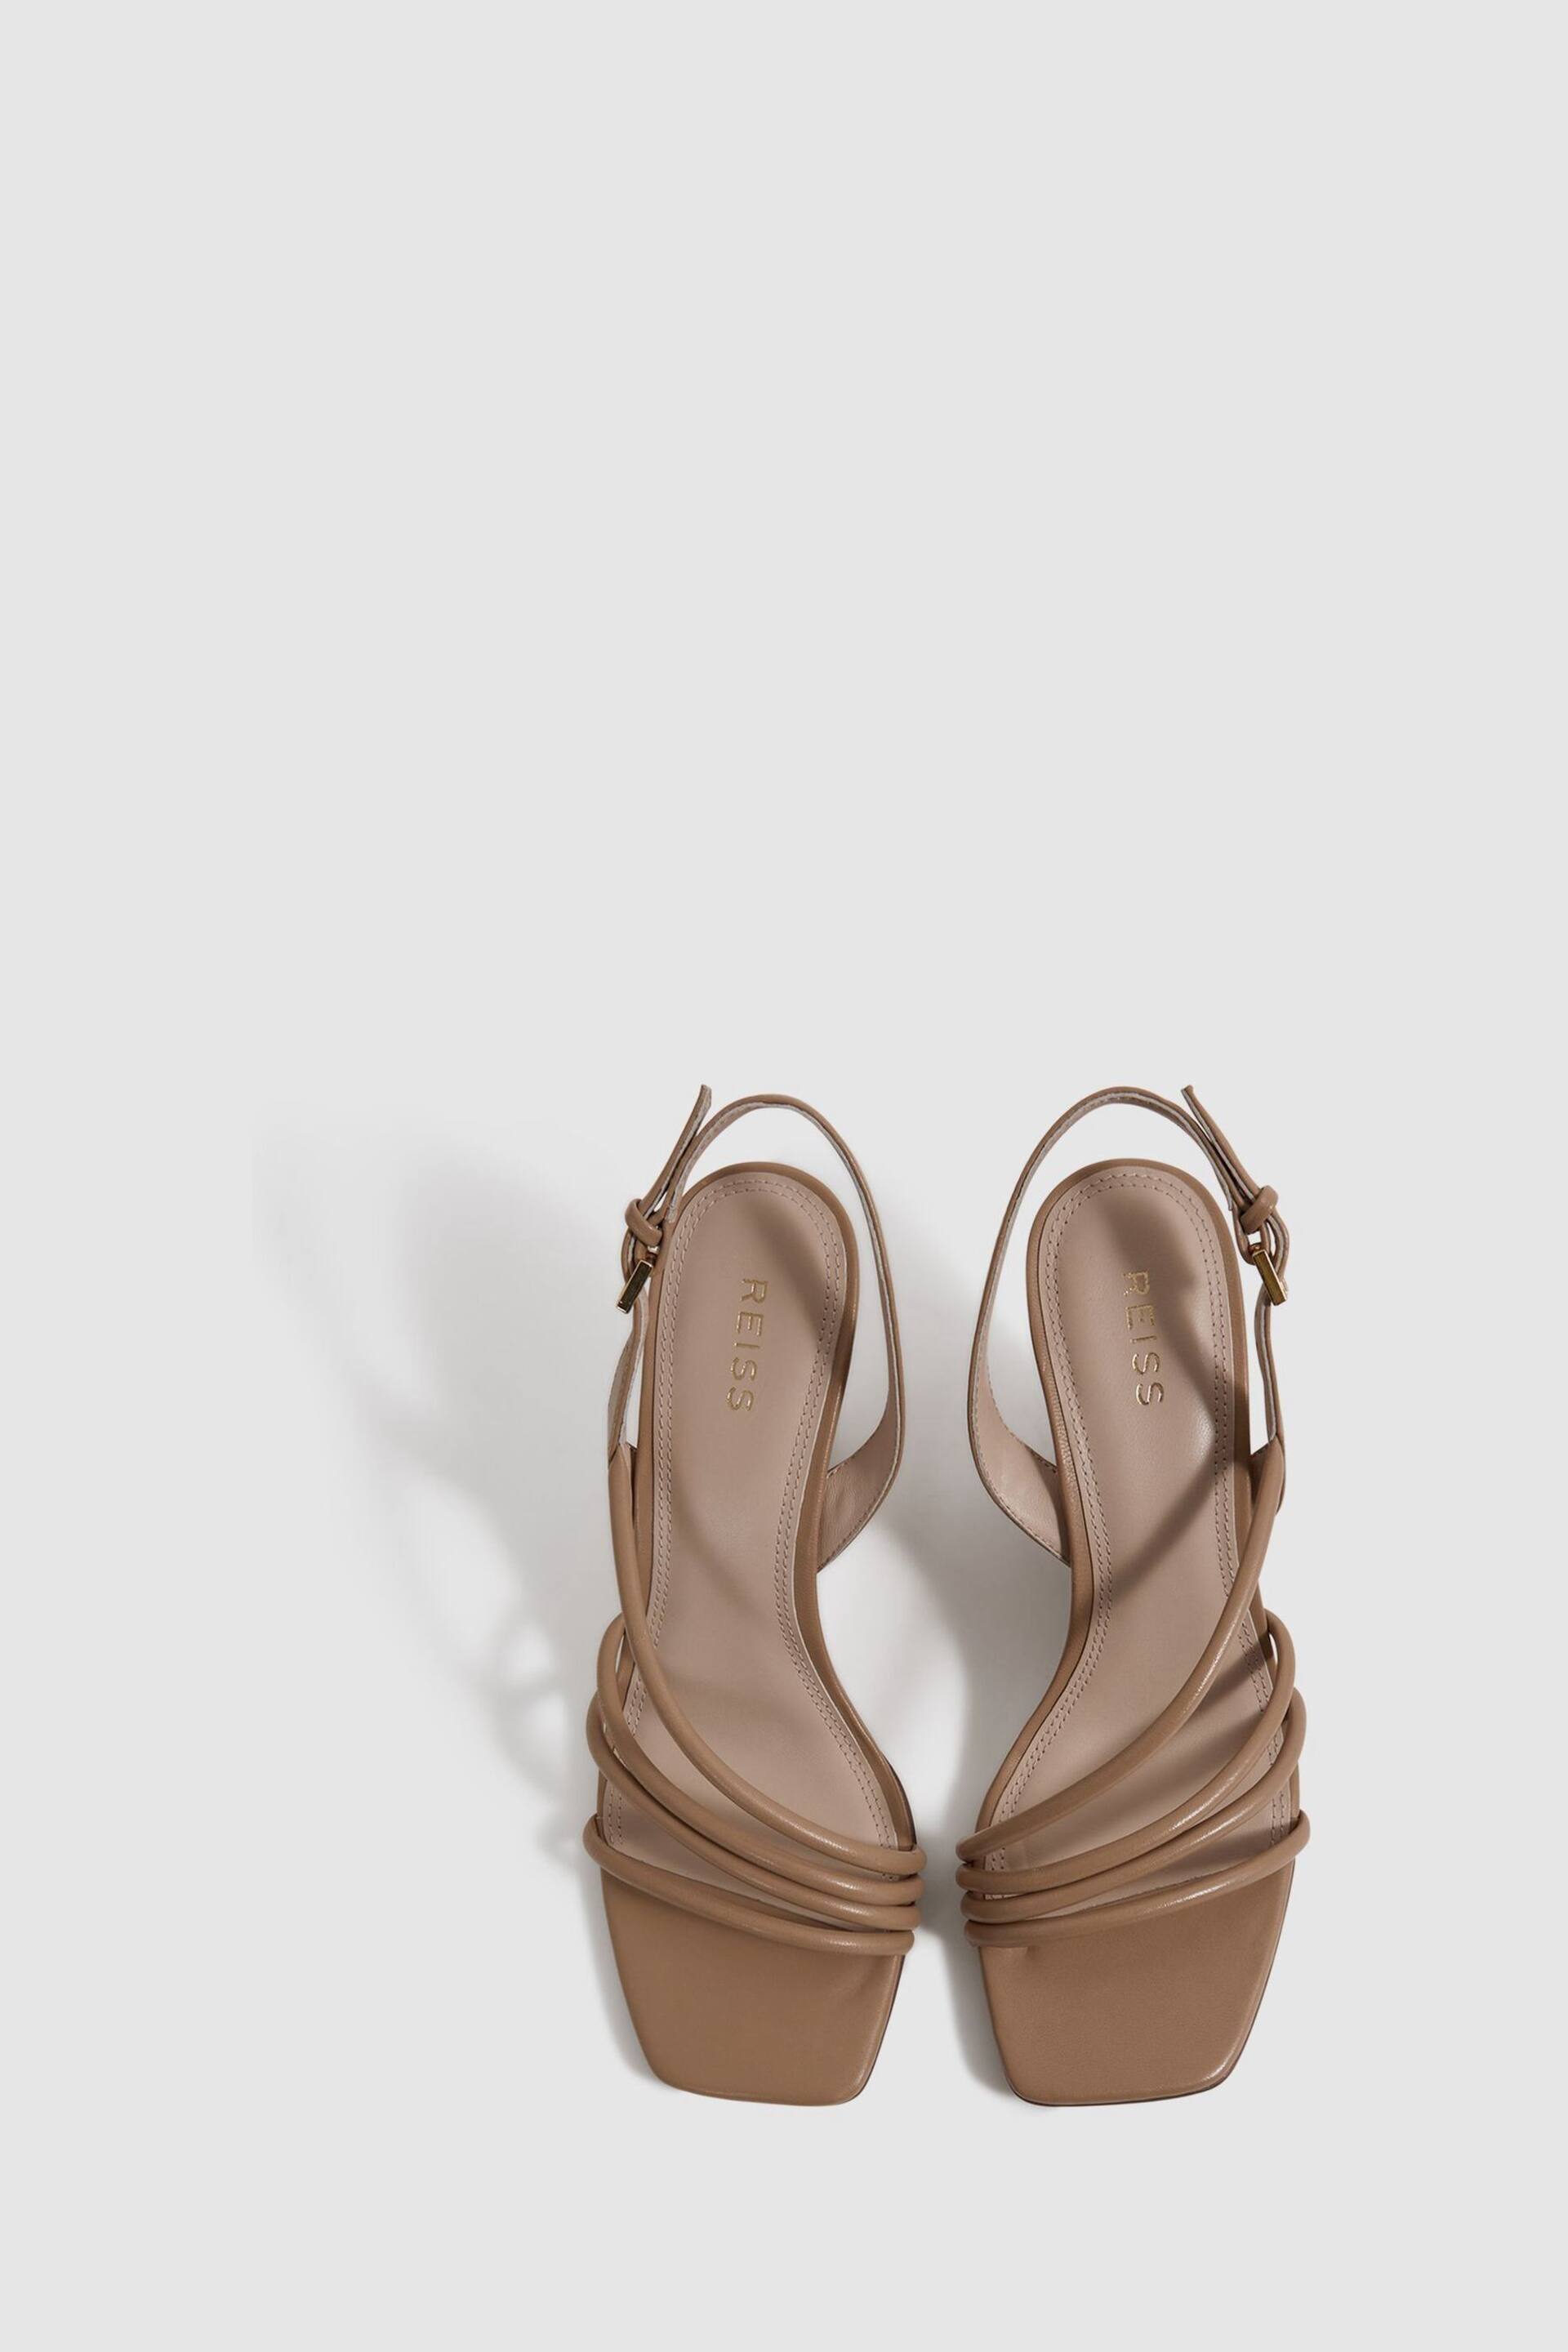 Reiss Nude Anya Leather Strappy Wedge Heels - Image 3 of 5